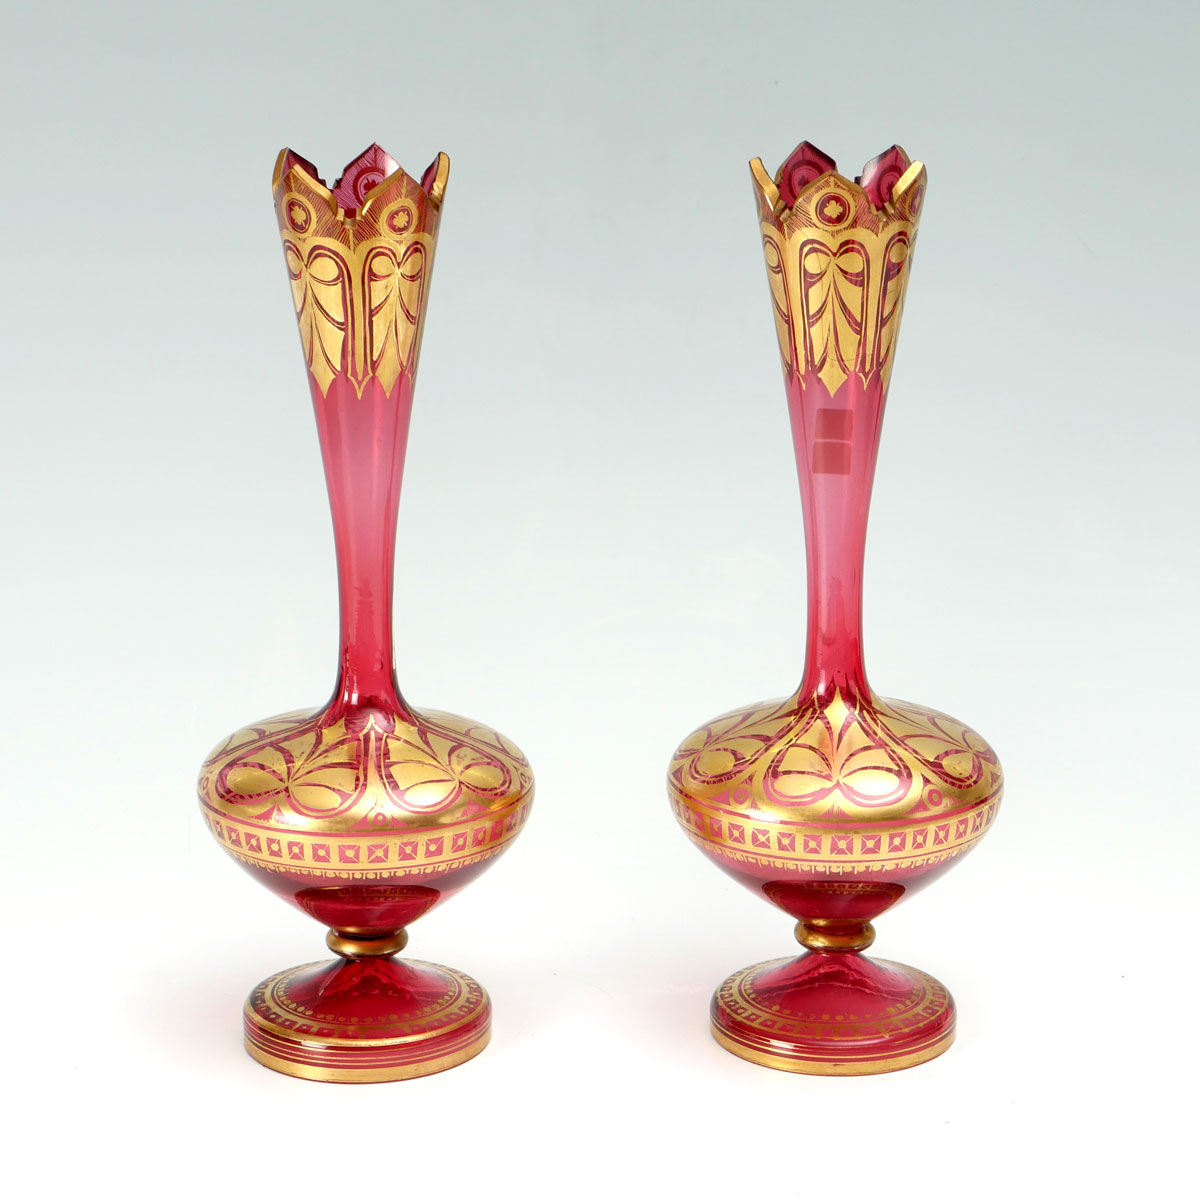 PAIR CRANBERRY MOSER STYLE VASES: